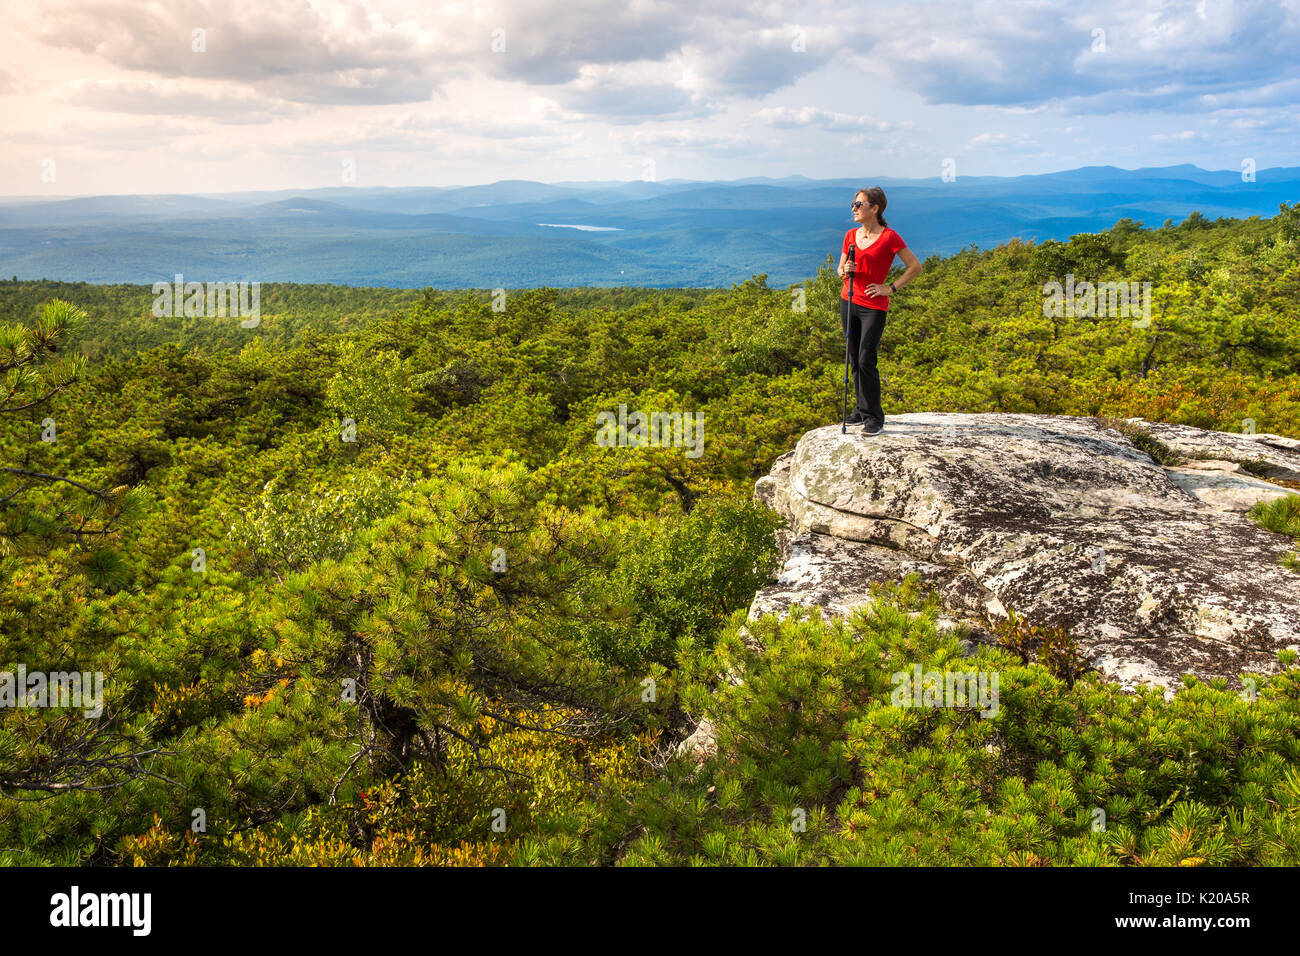 Women stands on a cliff edge and enjoys the nature at High Point, on top of Shawangunk Ridge, in Upstate New York. Stock Photo